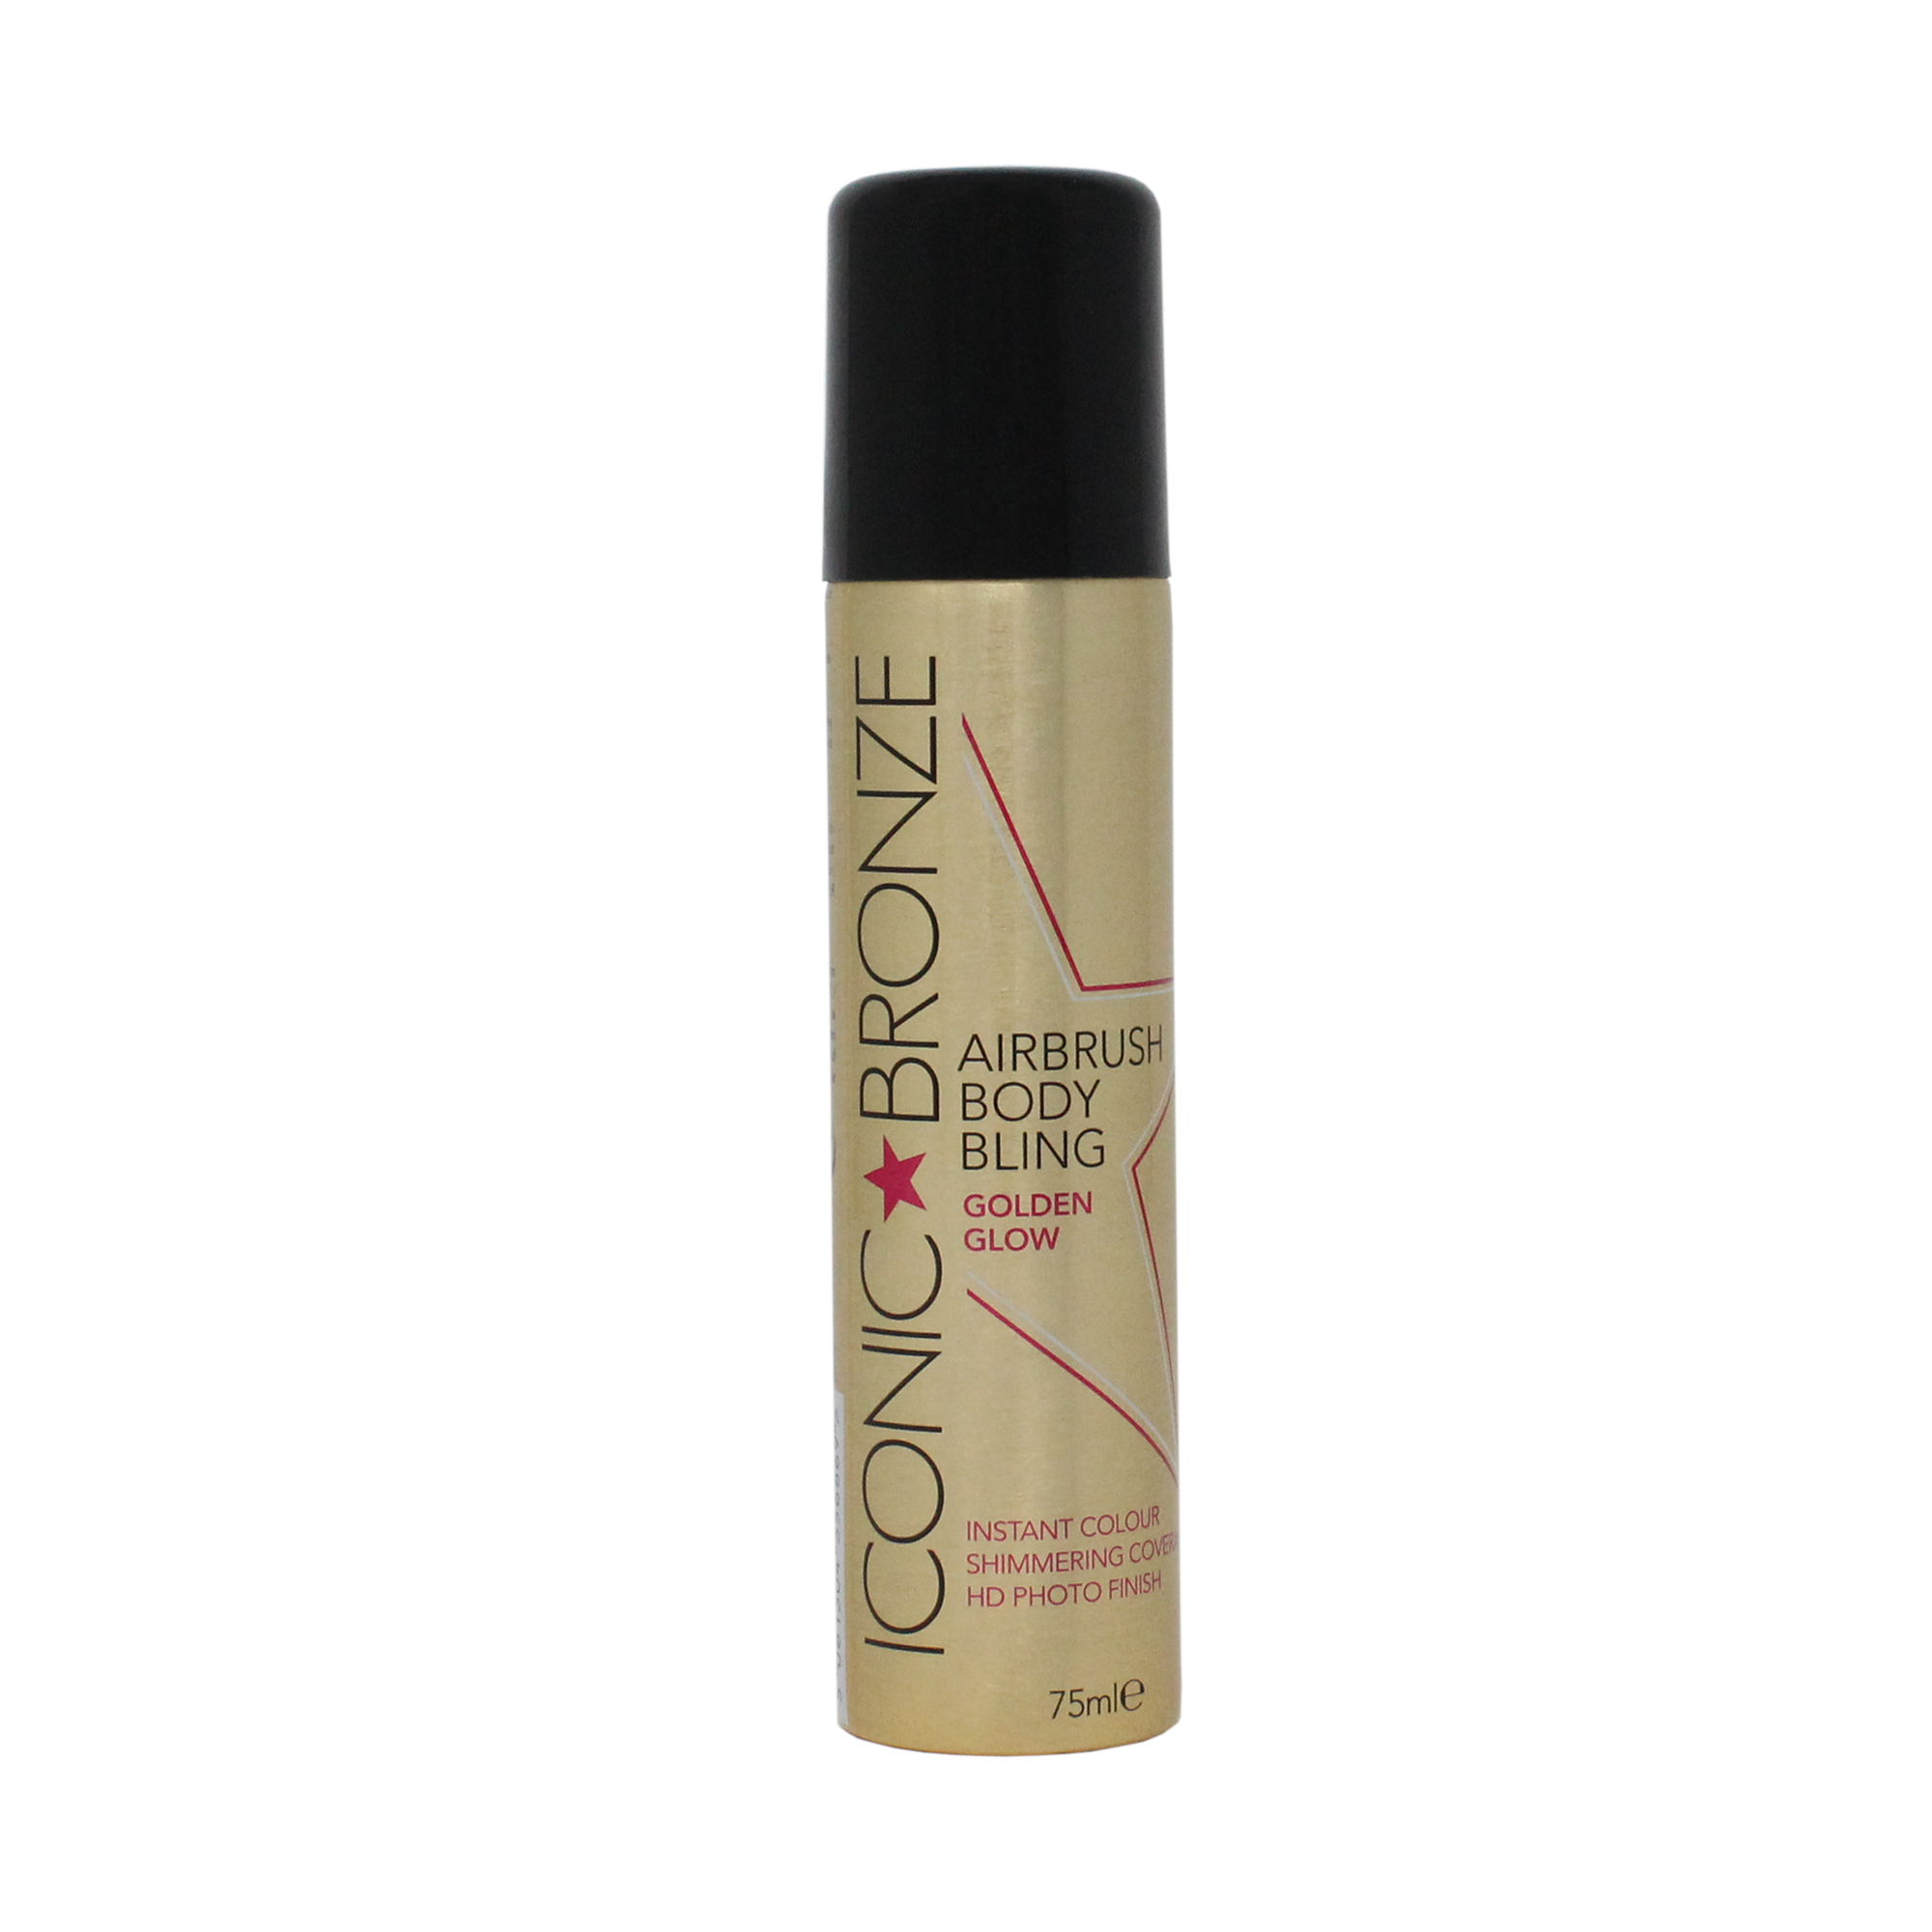 Iconic Bronze Airbrush Body Bling Instant Tan